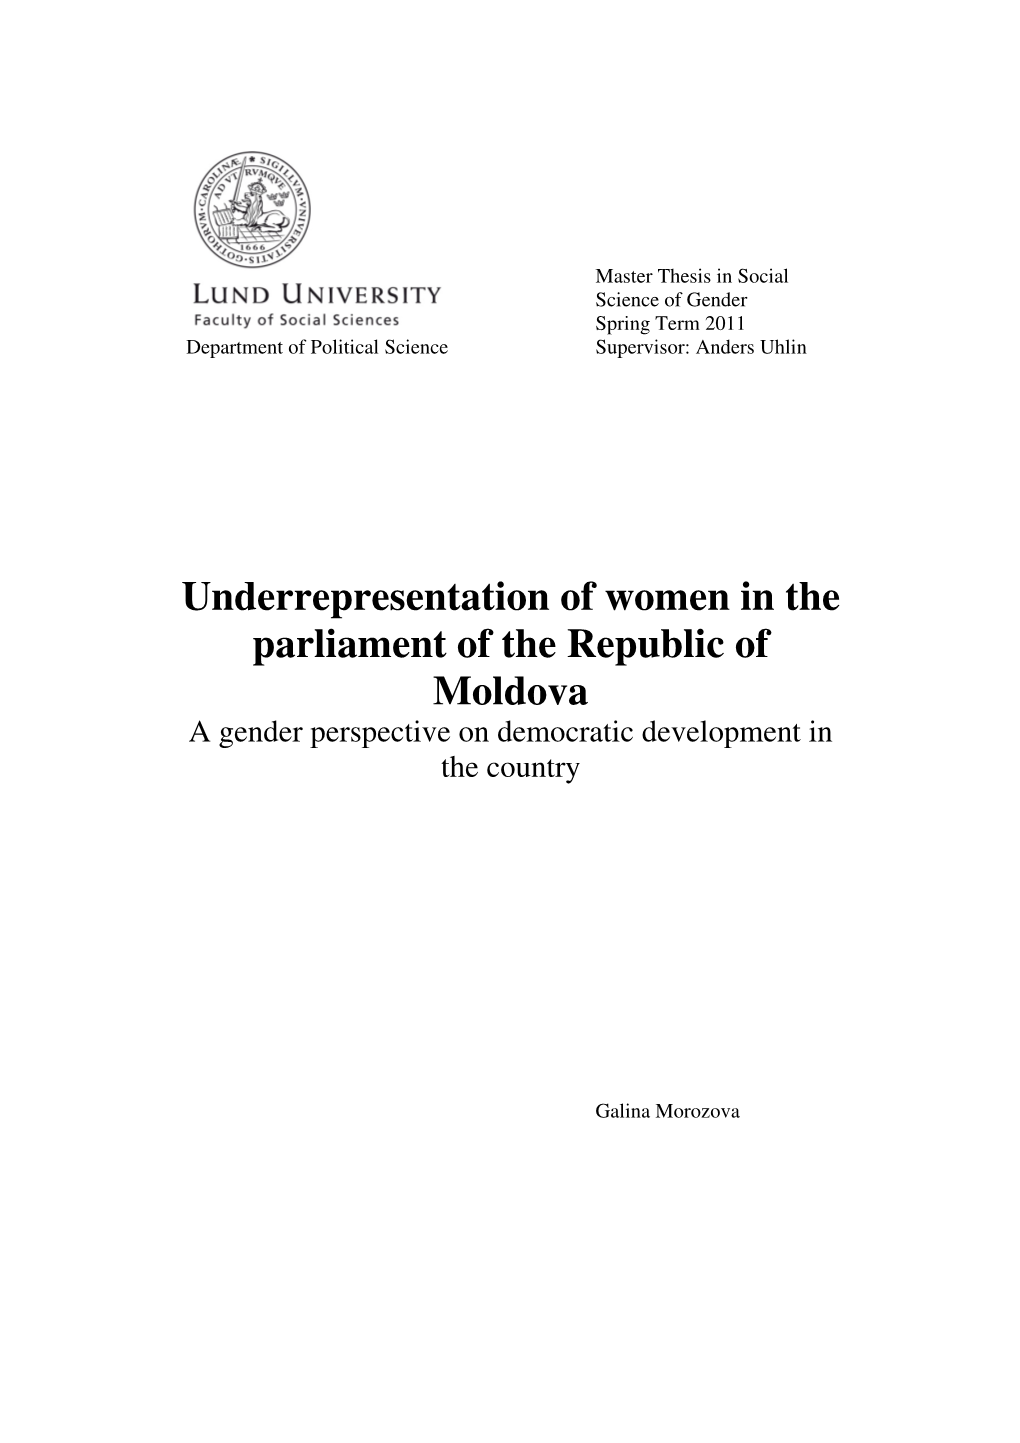 Underrepresentation of Women in the Parliament of the Republic of Moldova a Gender Perspective on Democratic Development in the Country